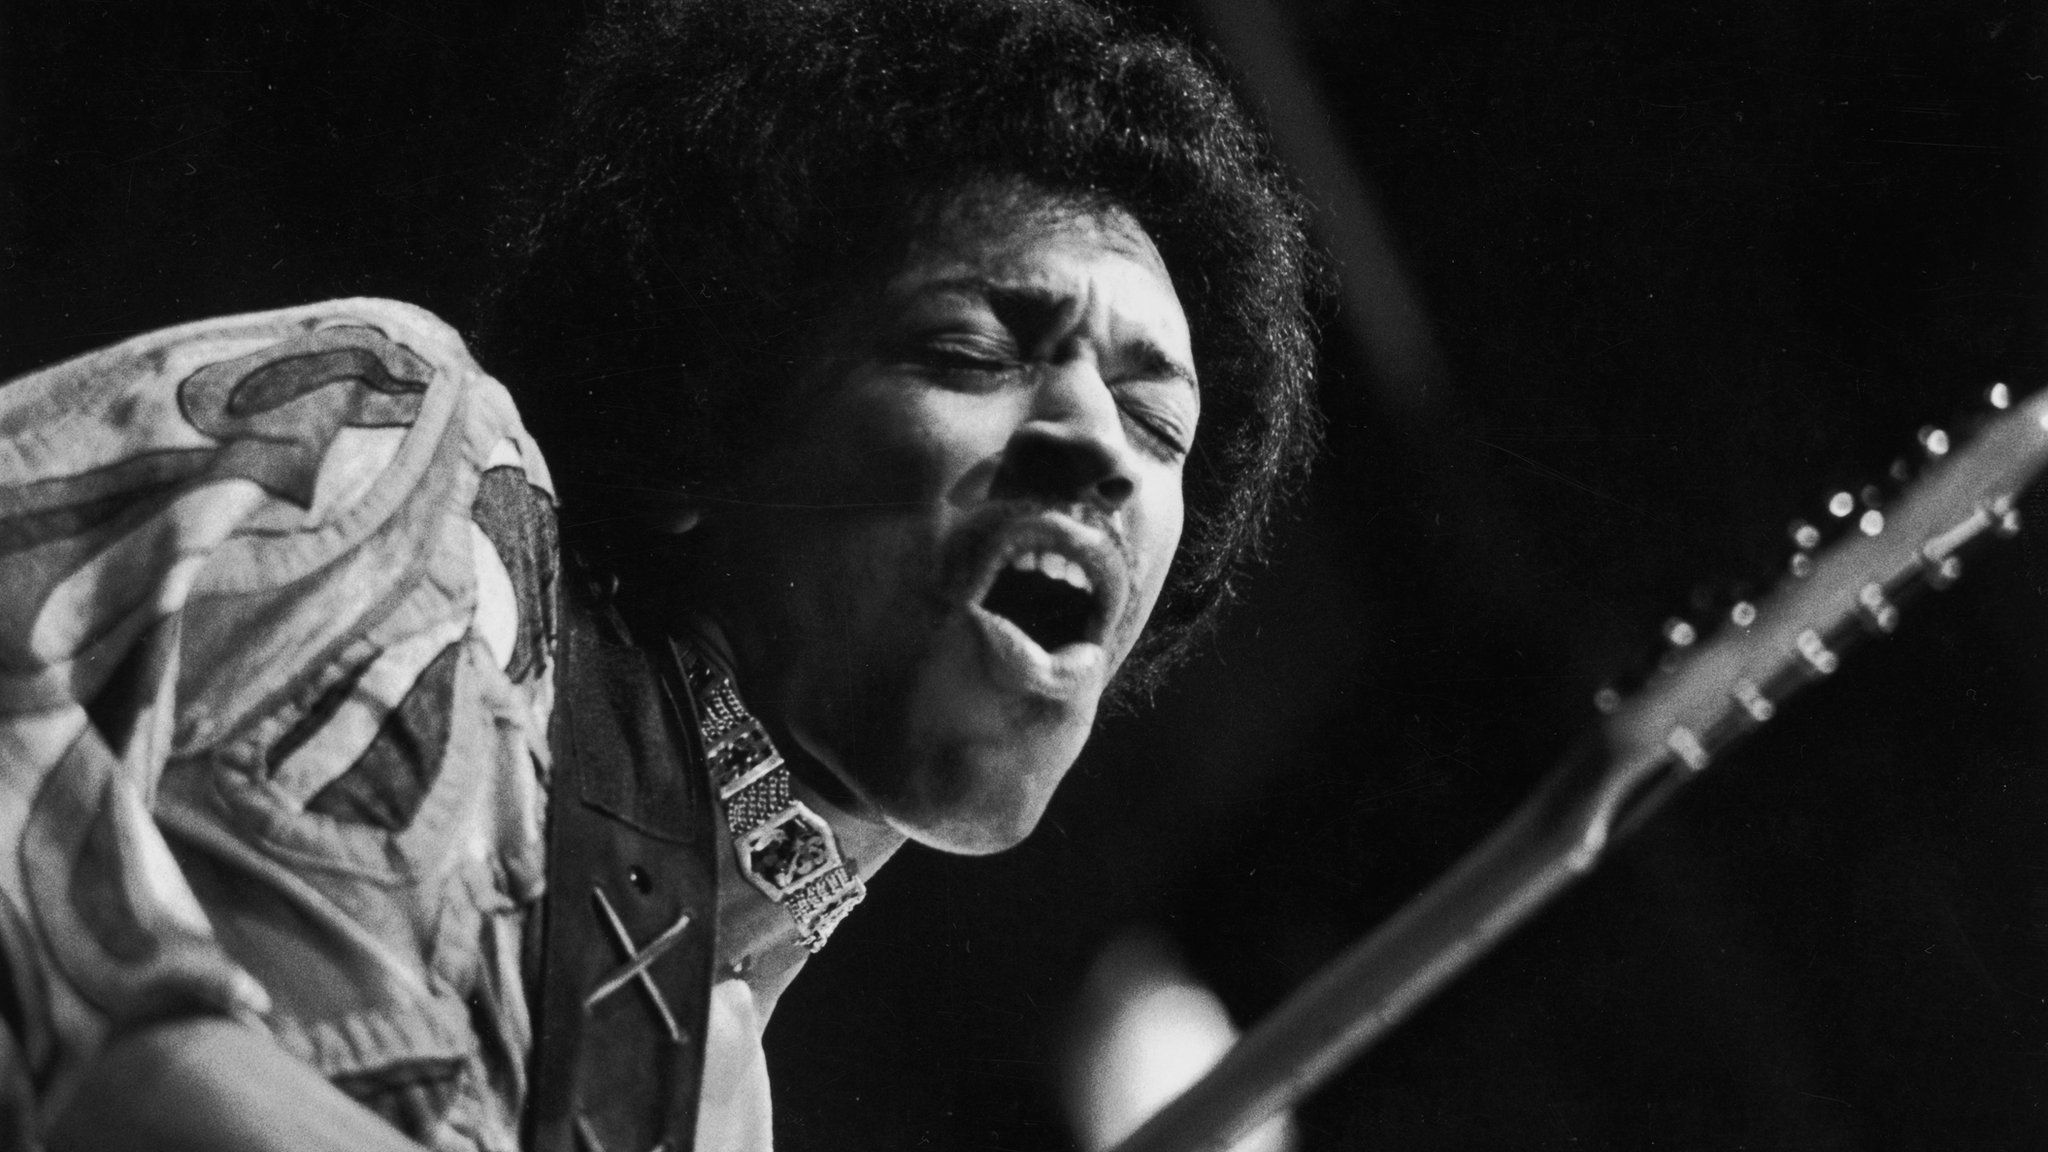 Jimi Hendrix’s ‘Star Spangled Banner’ Will Be Released Via AR In Support Of Black Lives Matter